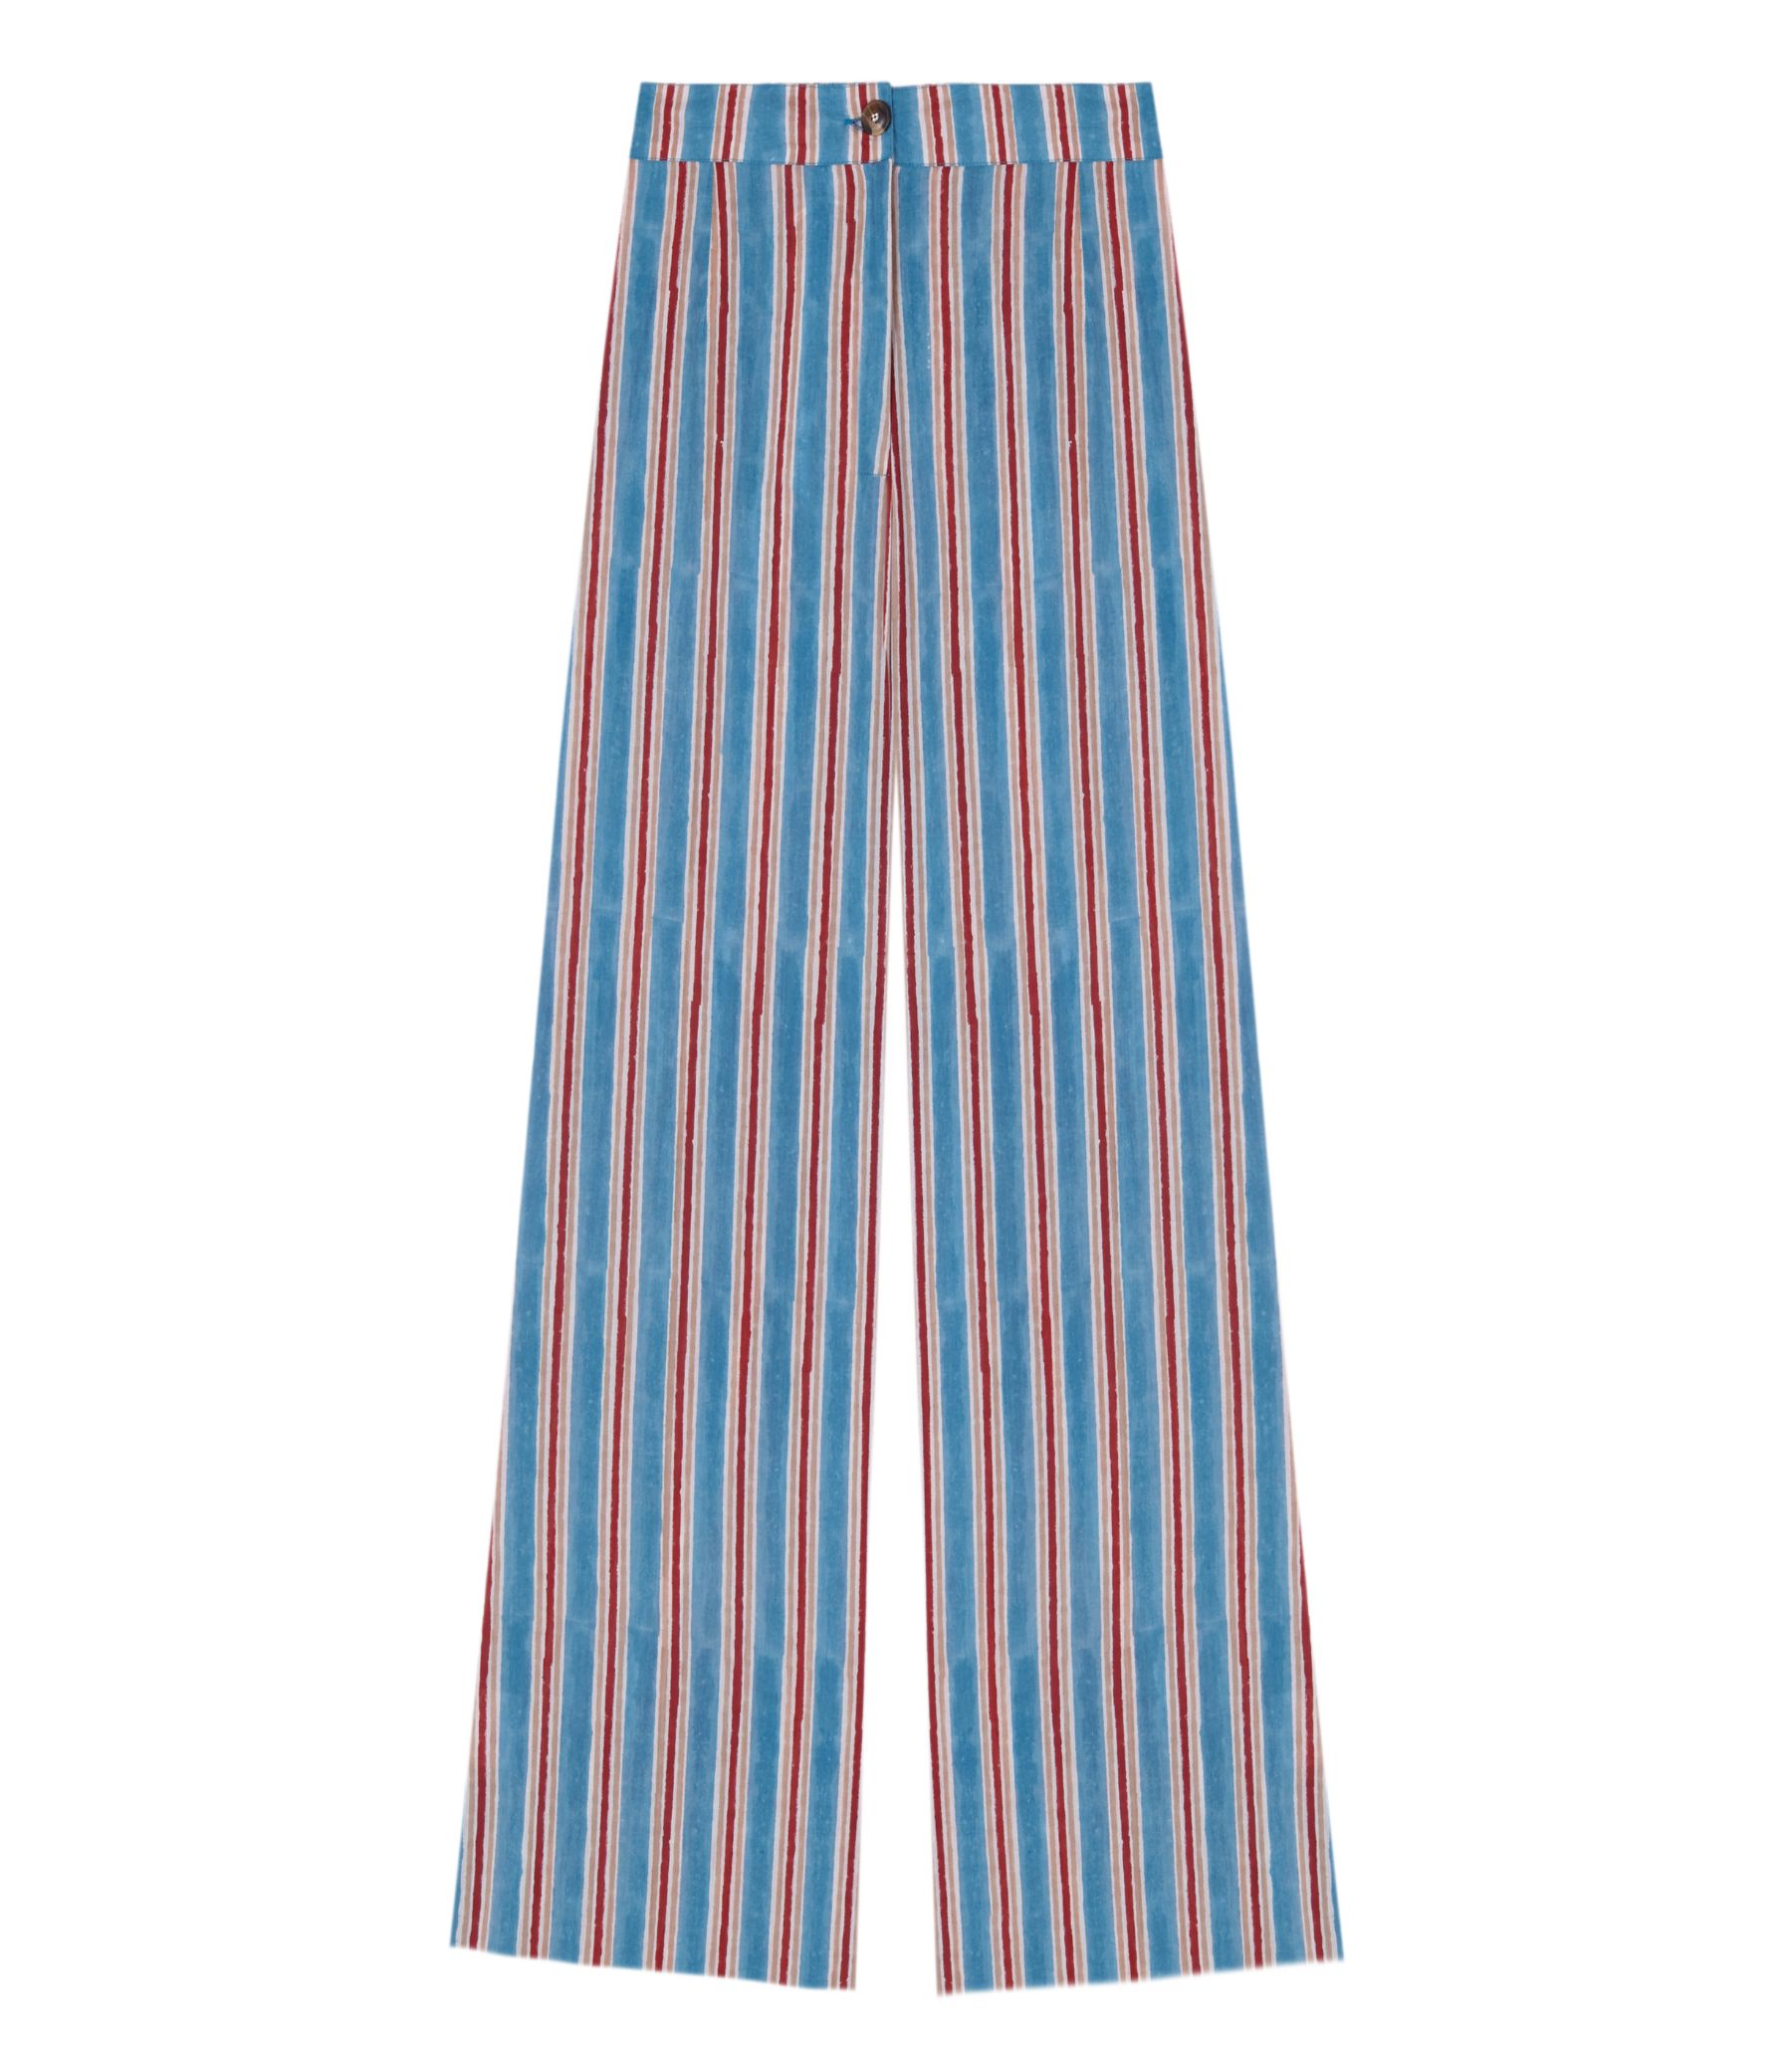 Candy Stripe Tearaway Pants - Design Yours at TSP